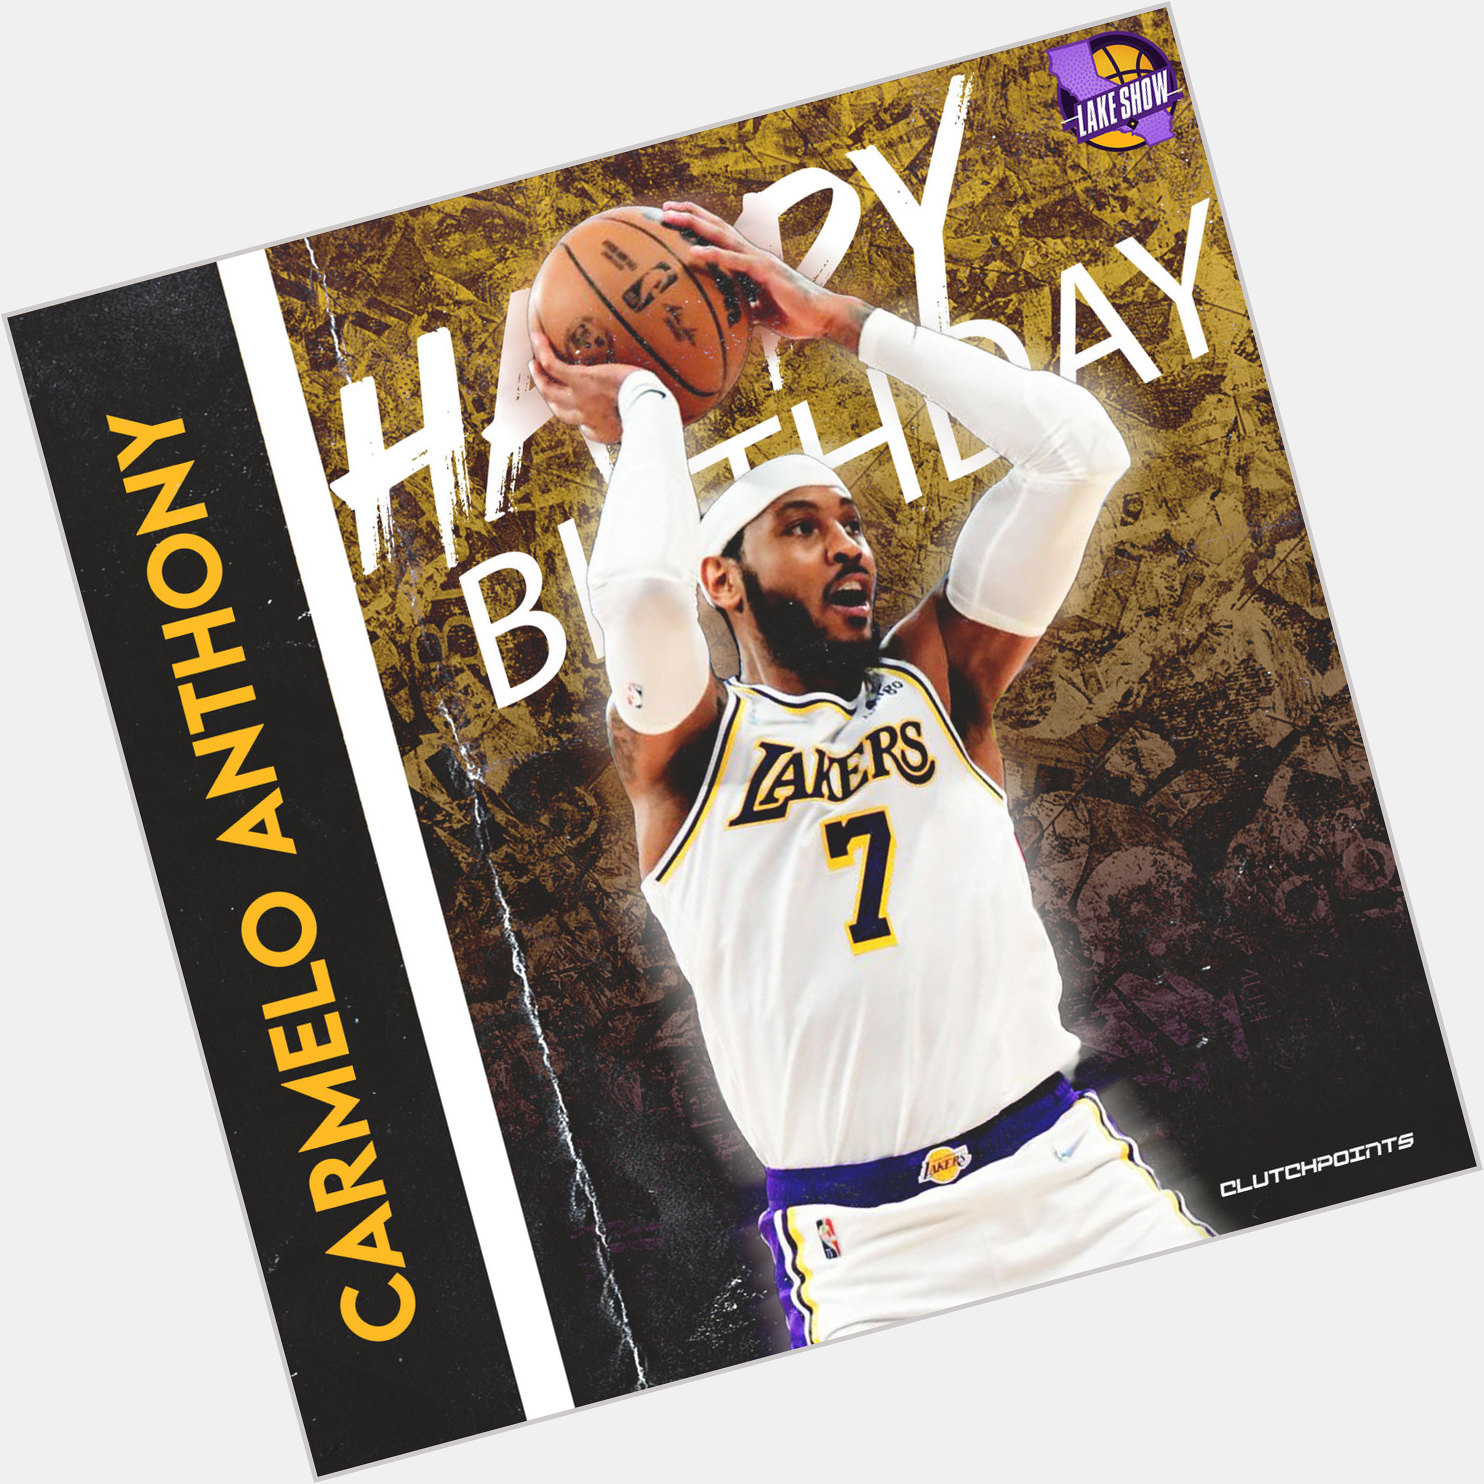 Lakers Nation! Let us all greet Carmelo Anthony a happy birthday! 